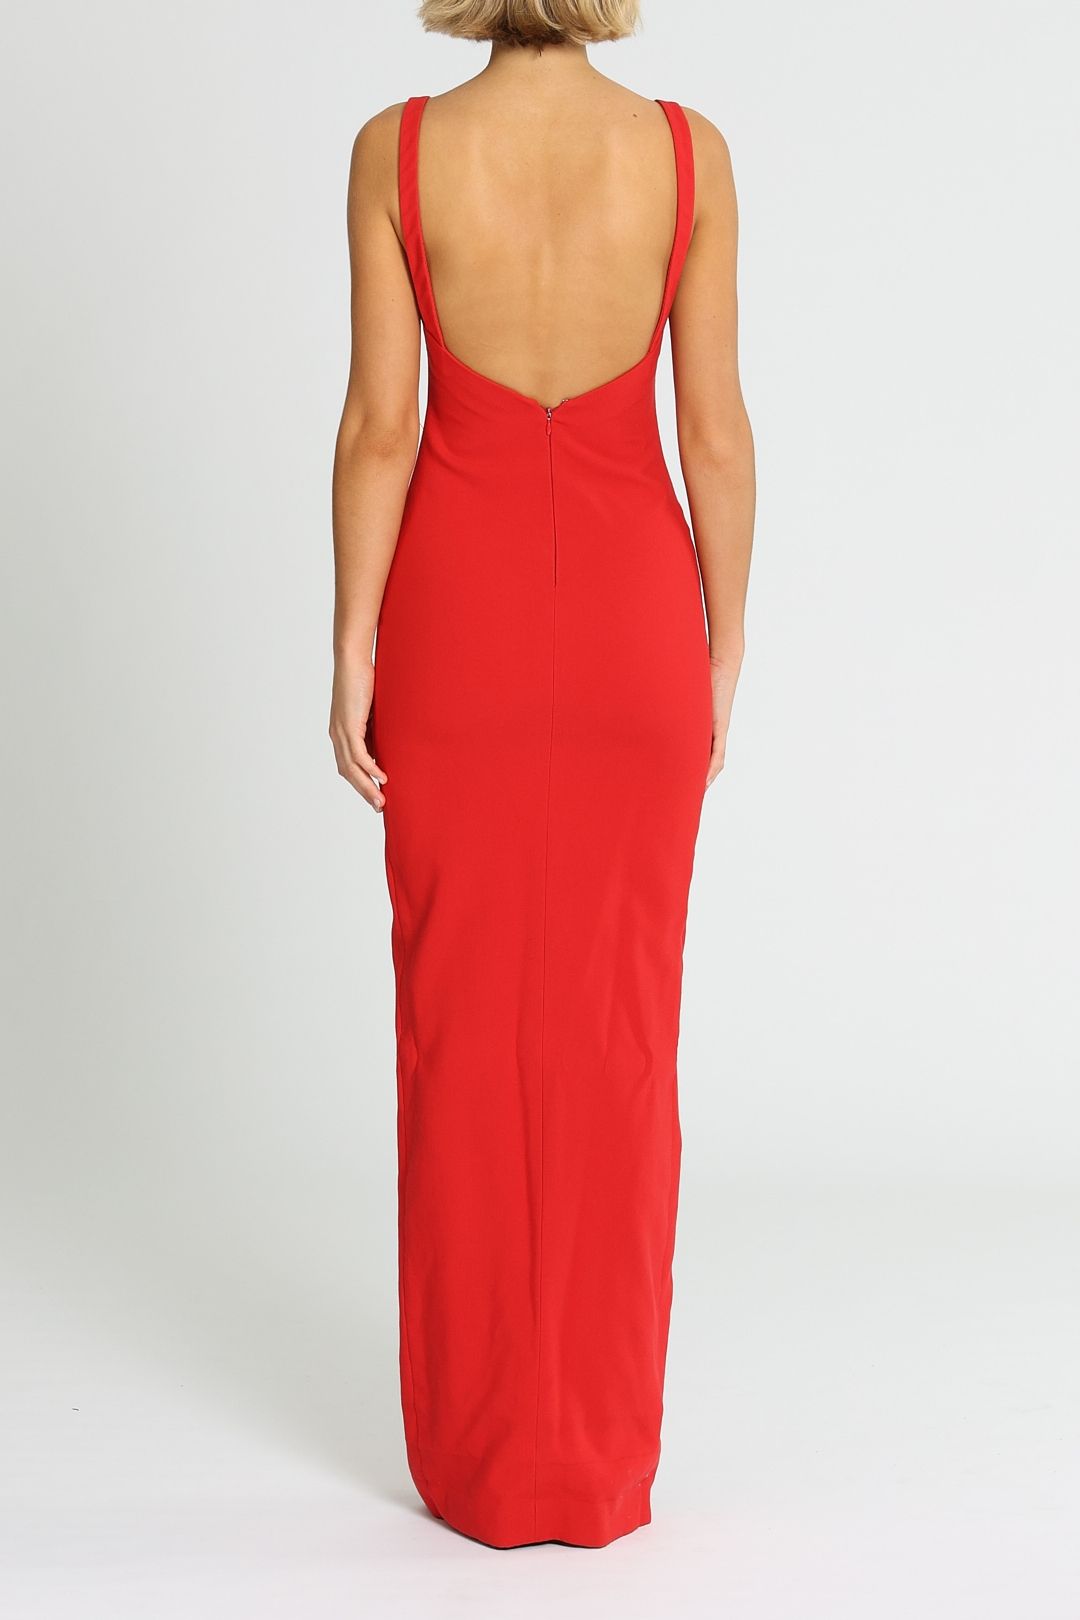 Likely NYC Bethany Gown Open Back